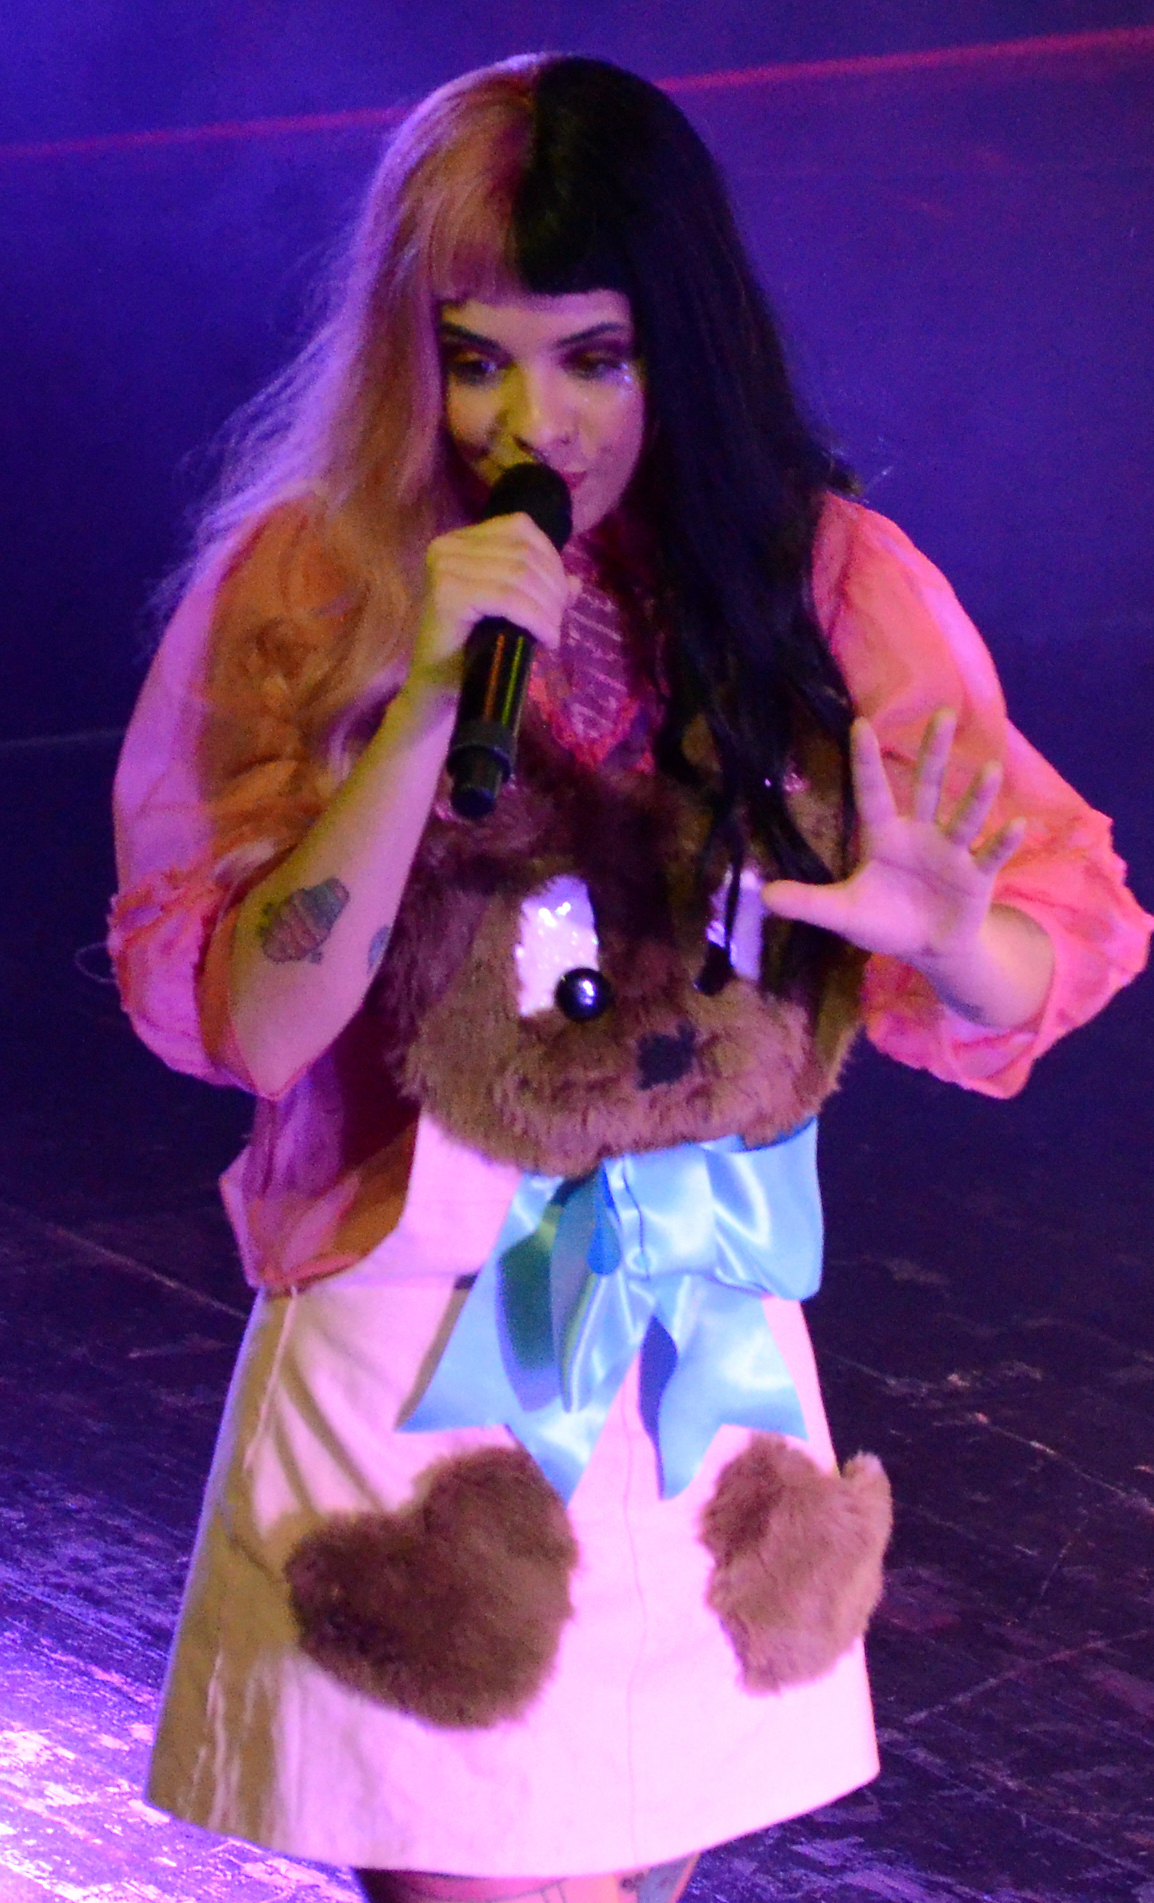 The 28-year old daughter of father (?) and mother(?) Melanie Martinez in 2024 photo. Melanie Martinez earned a  million dollar salary - leaving the net worth at 2 million in 2024